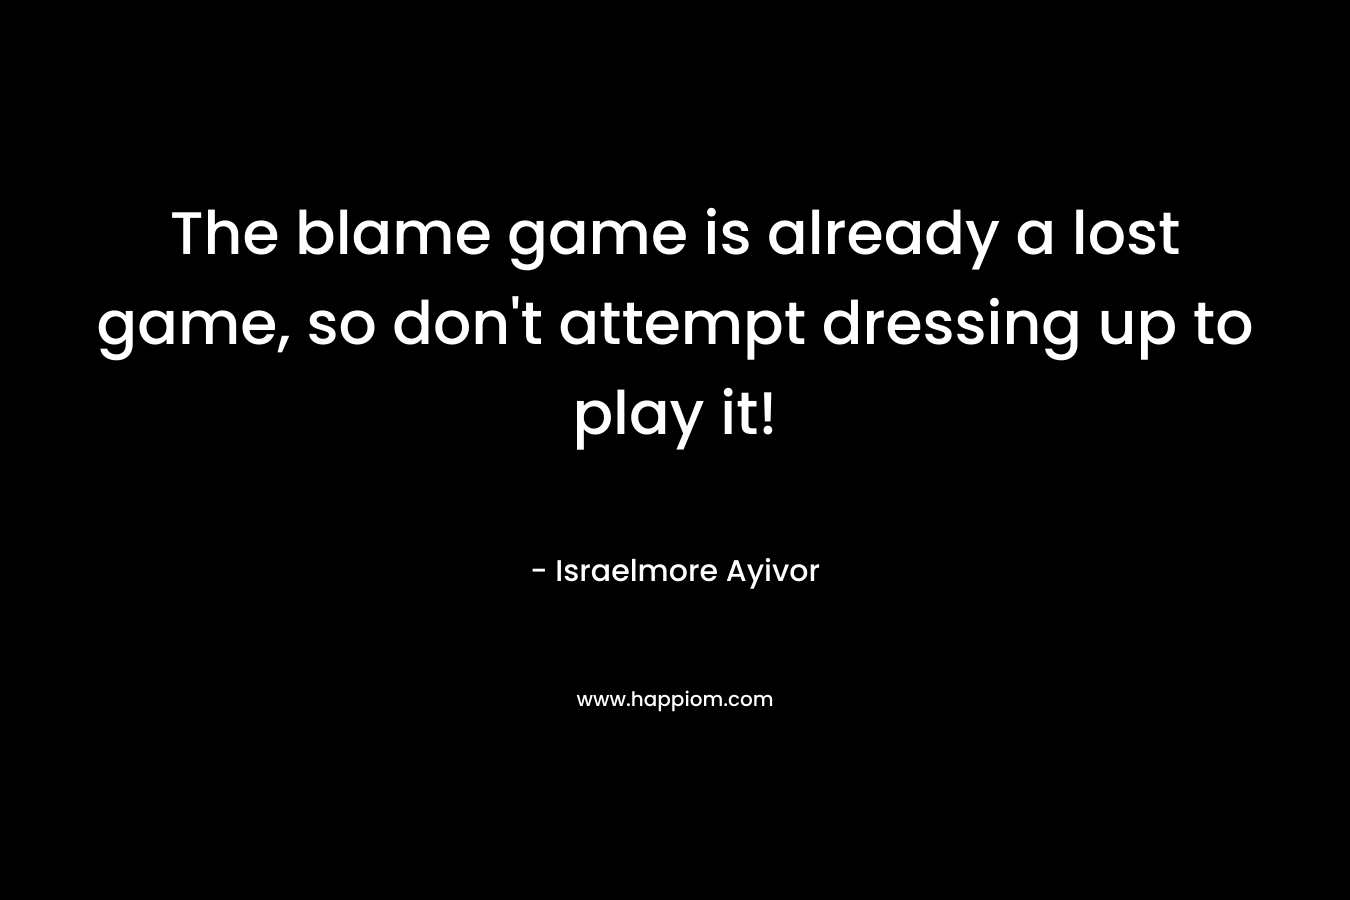 The blame game is already a lost game, so don’t attempt dressing up to play it! – Israelmore Ayivor